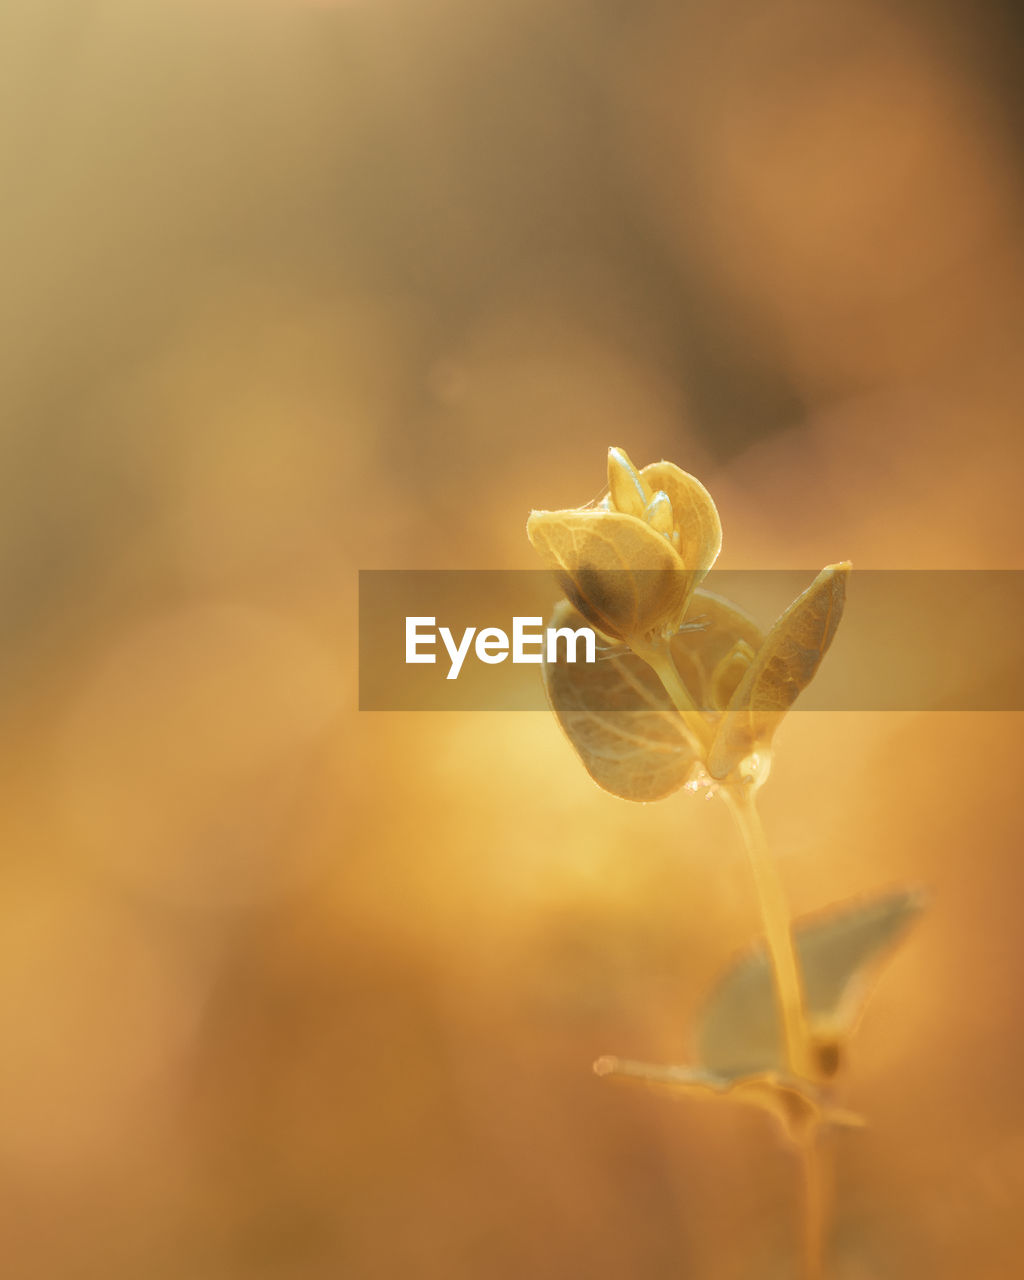 yellow, sunlight, leaf, plant, nature, flower, beauty in nature, close-up, macro photography, petal, freshness, no people, growth, sunset, plant part, fragility, flowering plant, branch, copy space, focus on foreground, outdoors, tranquility, light, selective focus, back lit, backgrounds, springtime, sky, autumn, gold, plant stem, softness, summer, defocused, environment